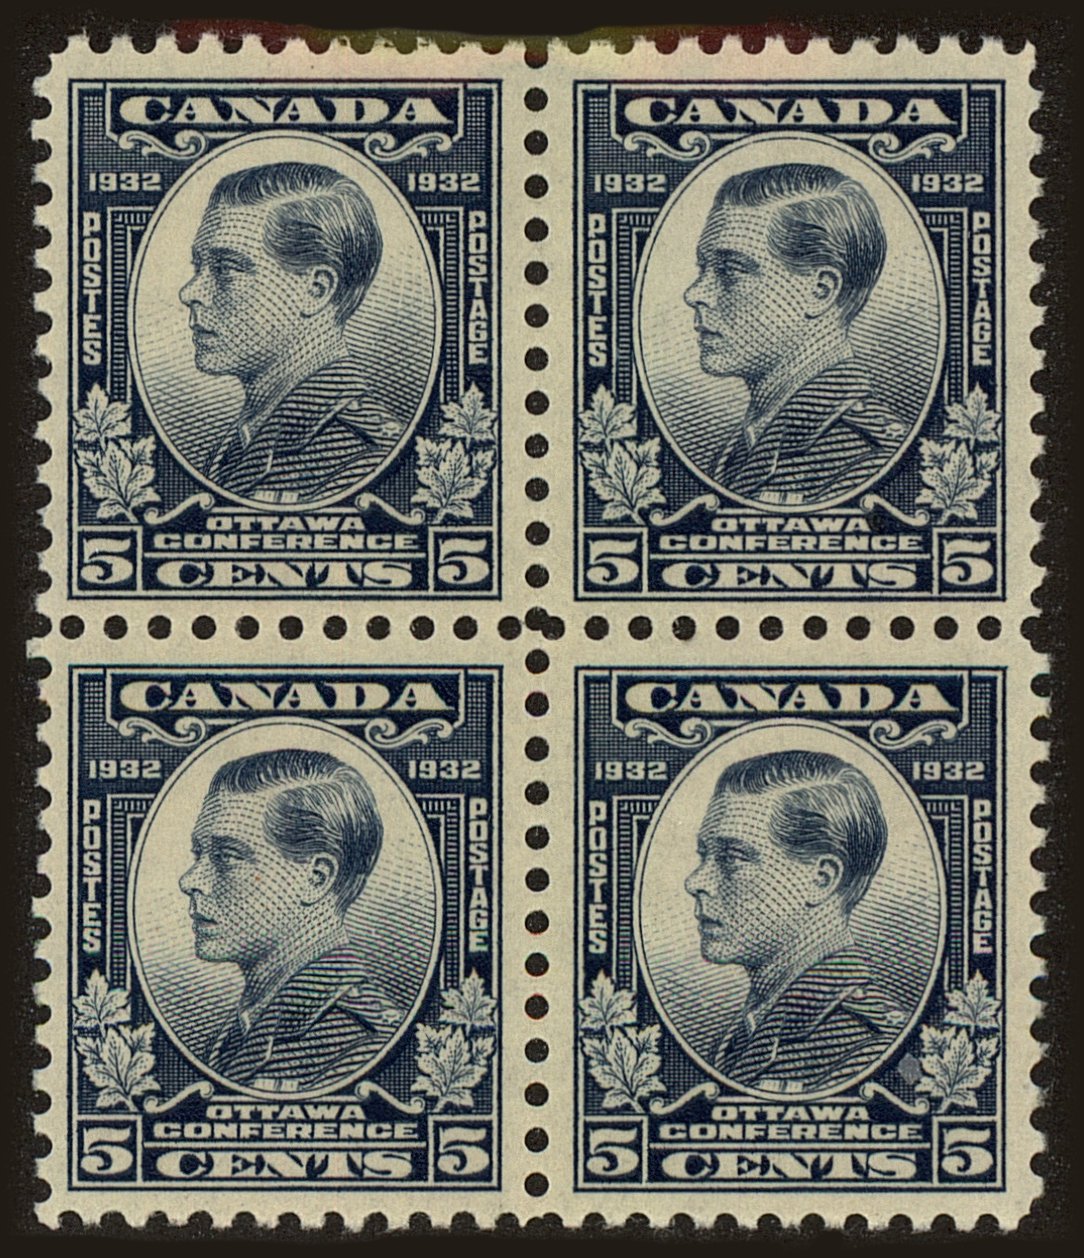 Front view of Canada 193 collectors stamp